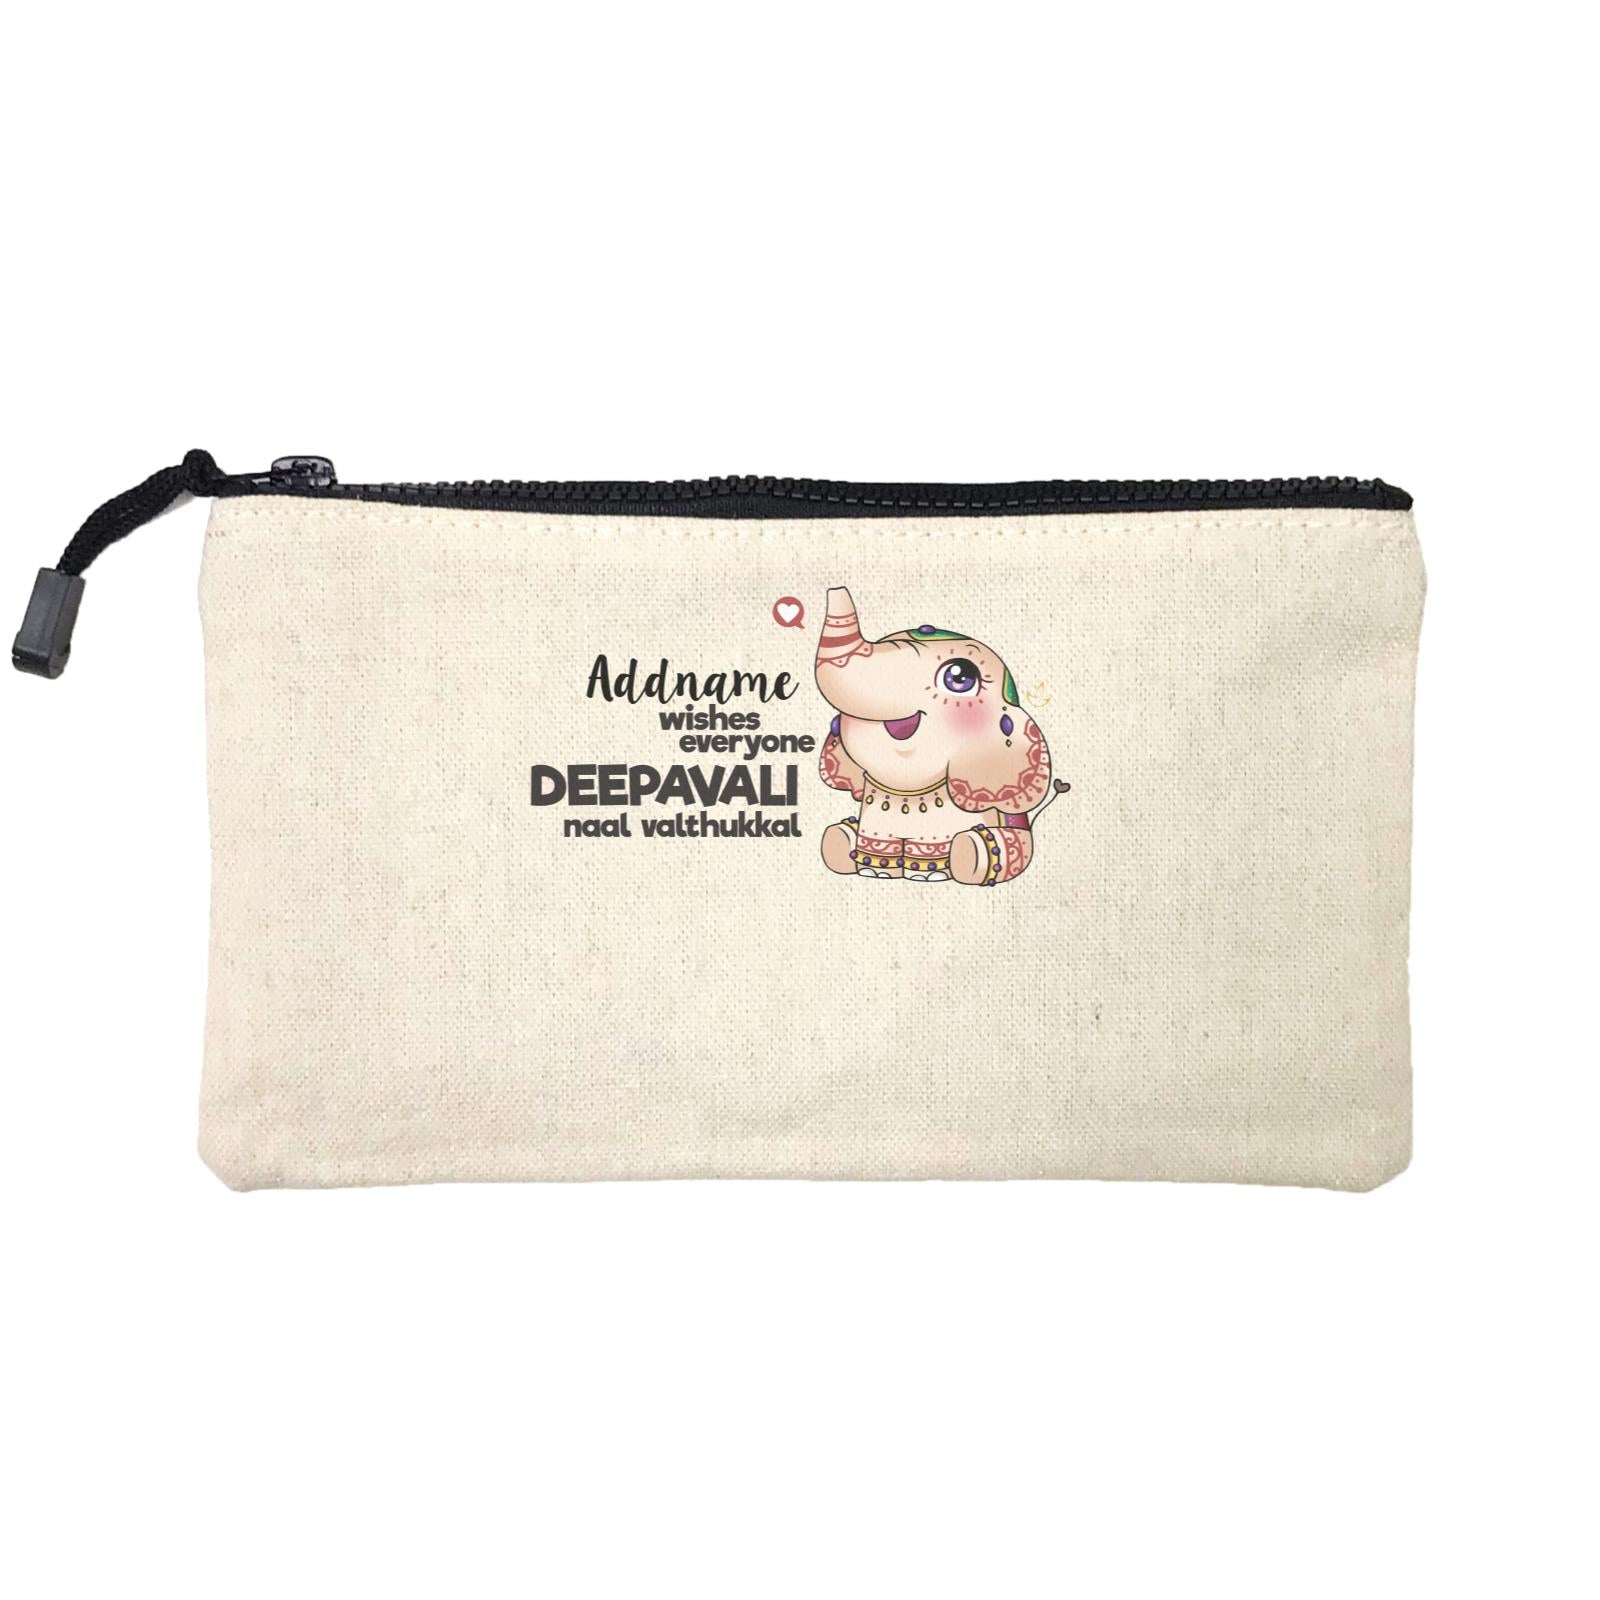 Deepavali Cute Elephant Wishes Everyone Deepavali Addname Mini Accessories Stationery Pouch